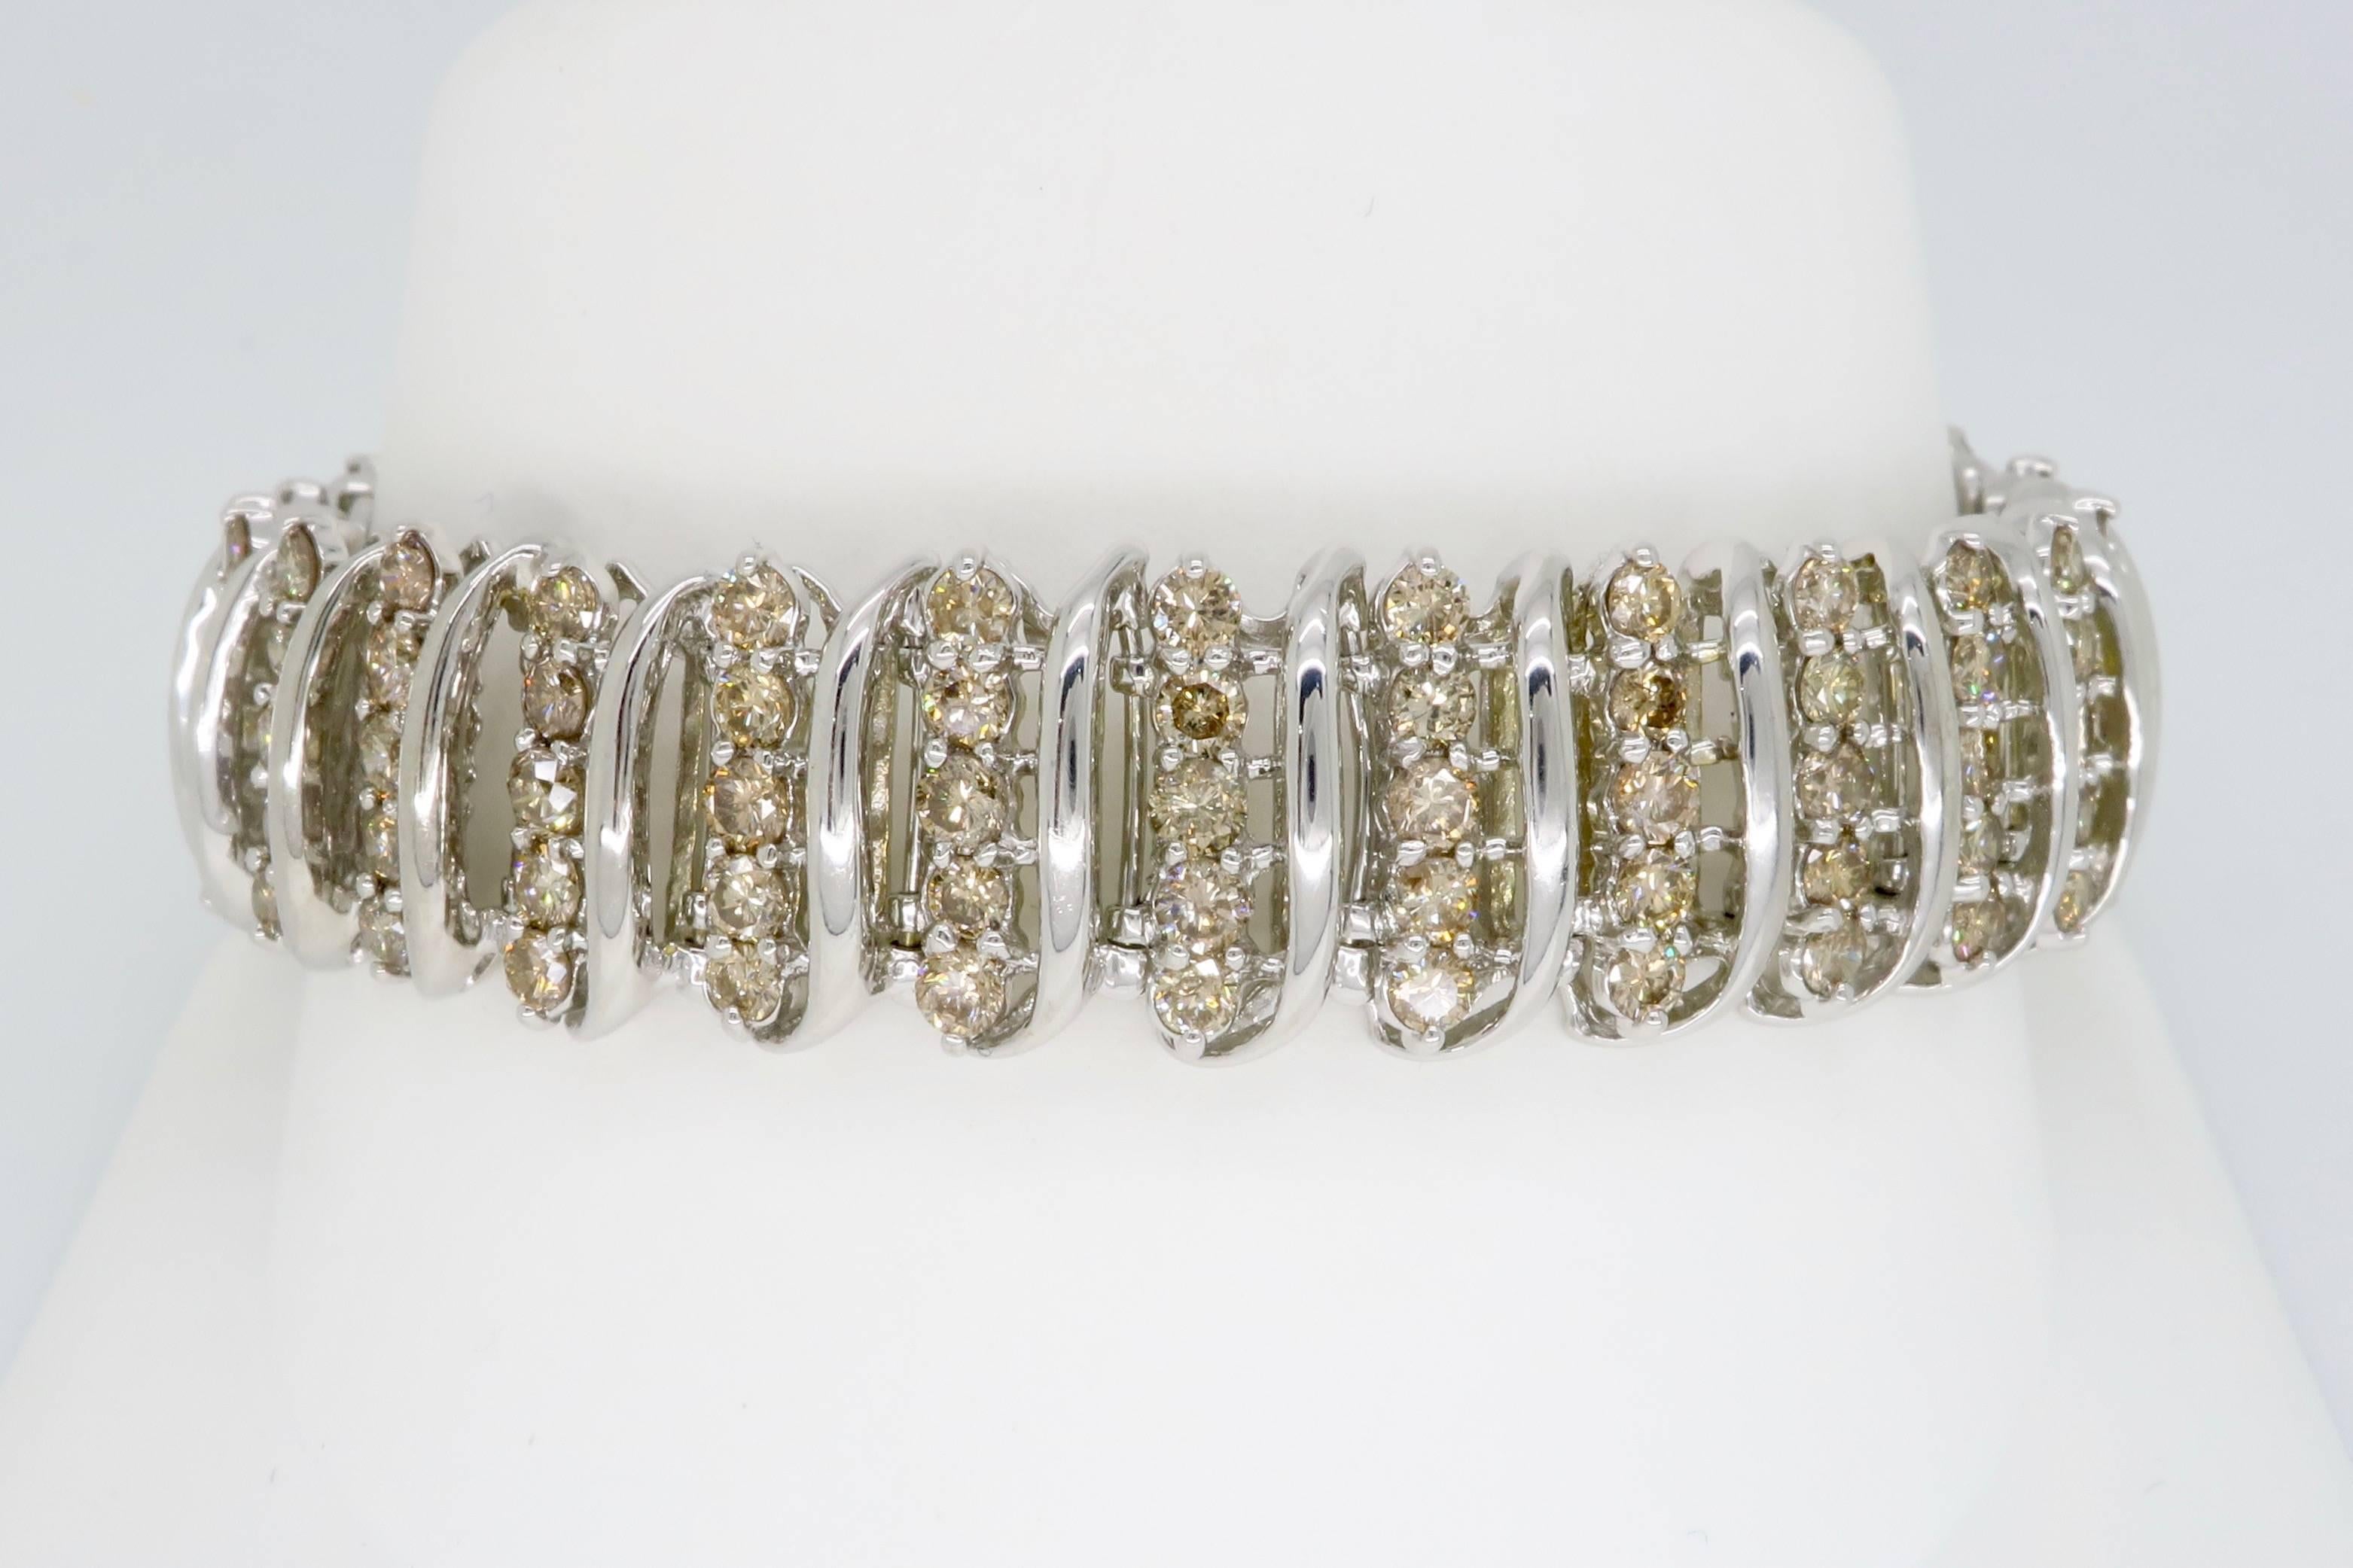 This beautiful bracelet features 150 Round Brilliant Cut Diamonds. The diamonds have light brown color and SI to I clarity. The total diamond weight is approximately 3.00CTW. The 10K white gold bracelet is 7